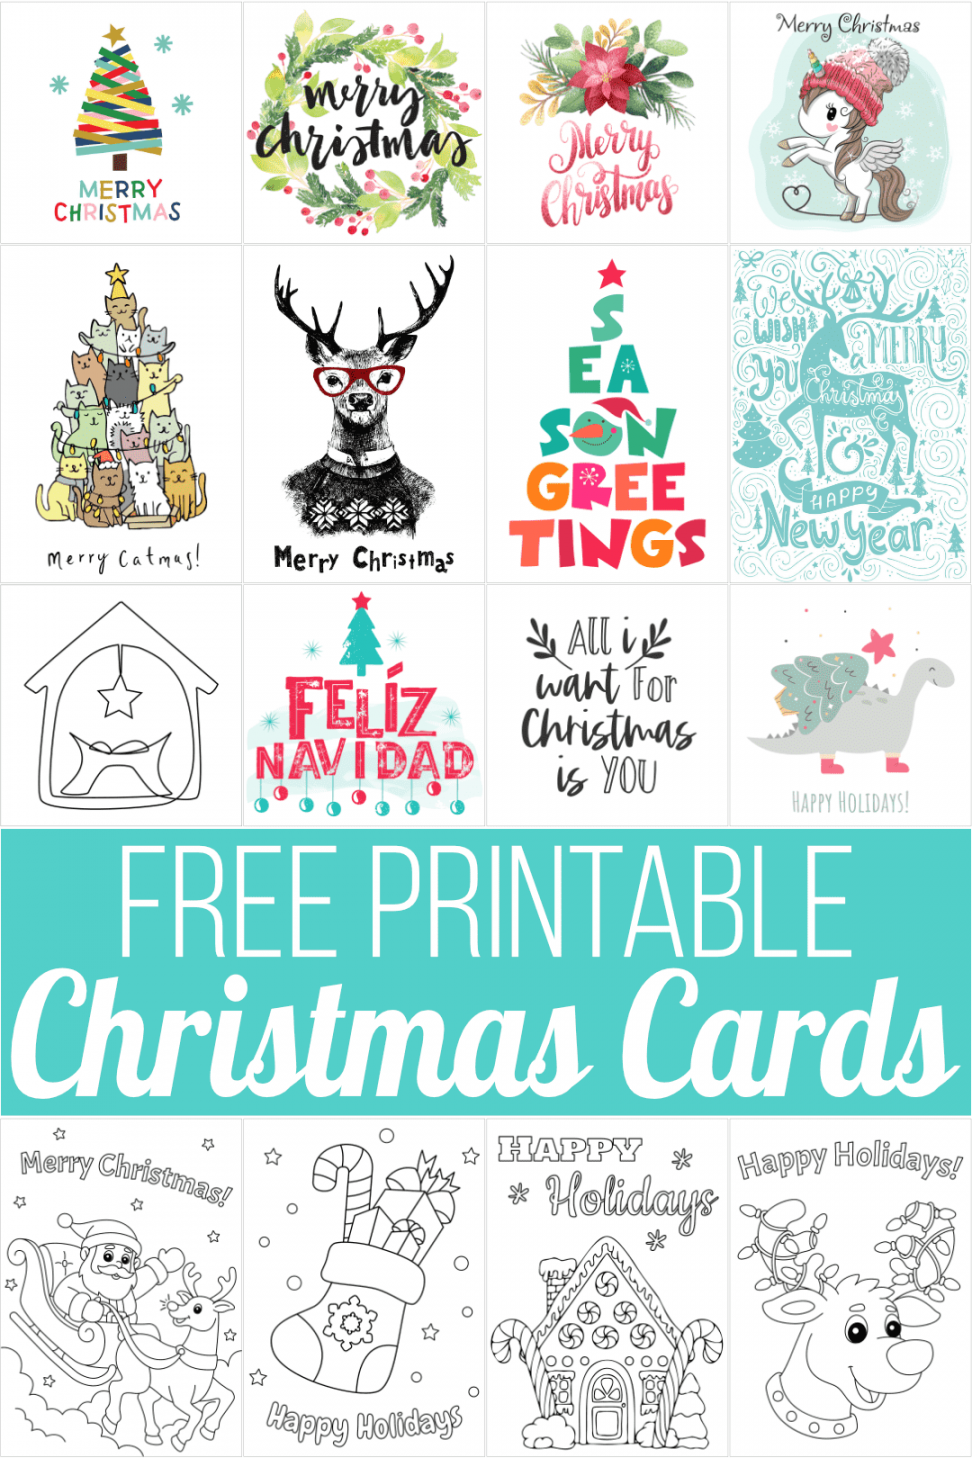 Free Printable Cards for all Occasions